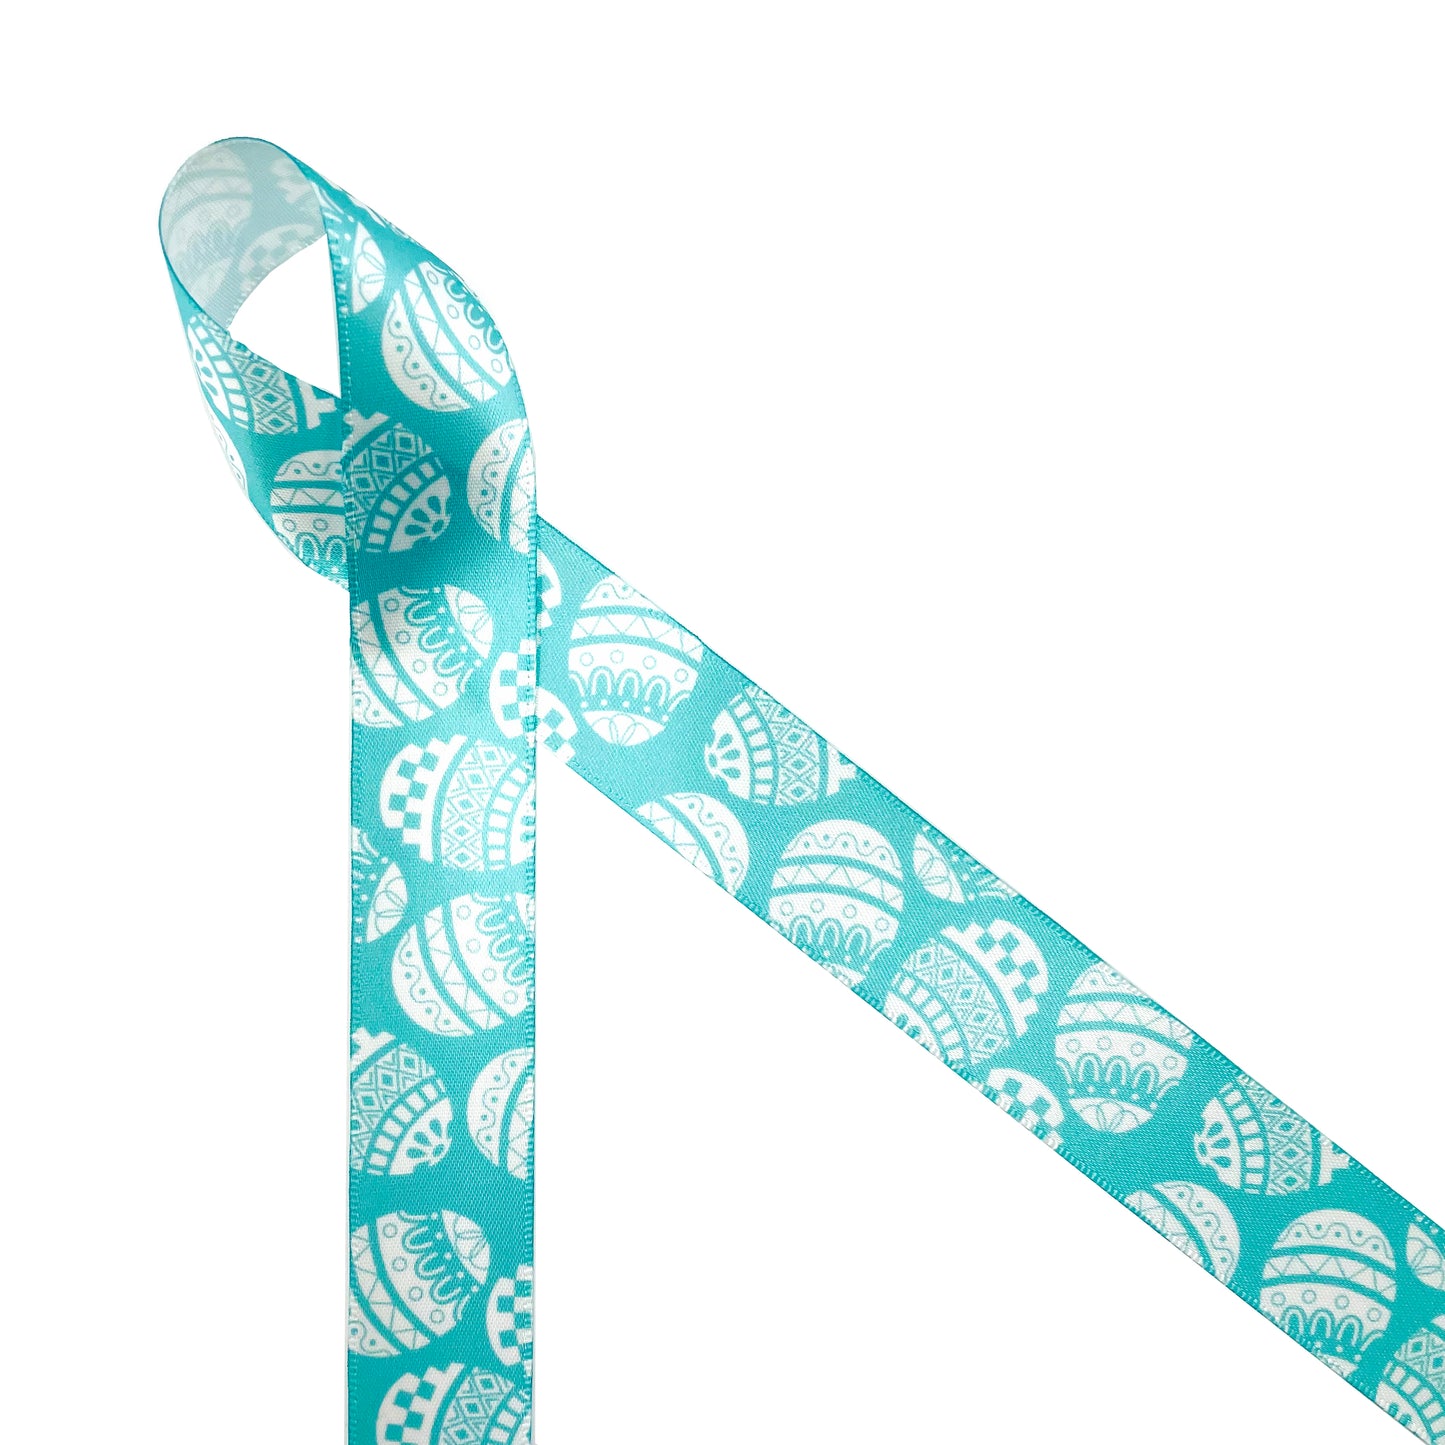 Easter Egg Ribbon stencil print in white with a lavender, pink or teal background printed on7/8" white satin